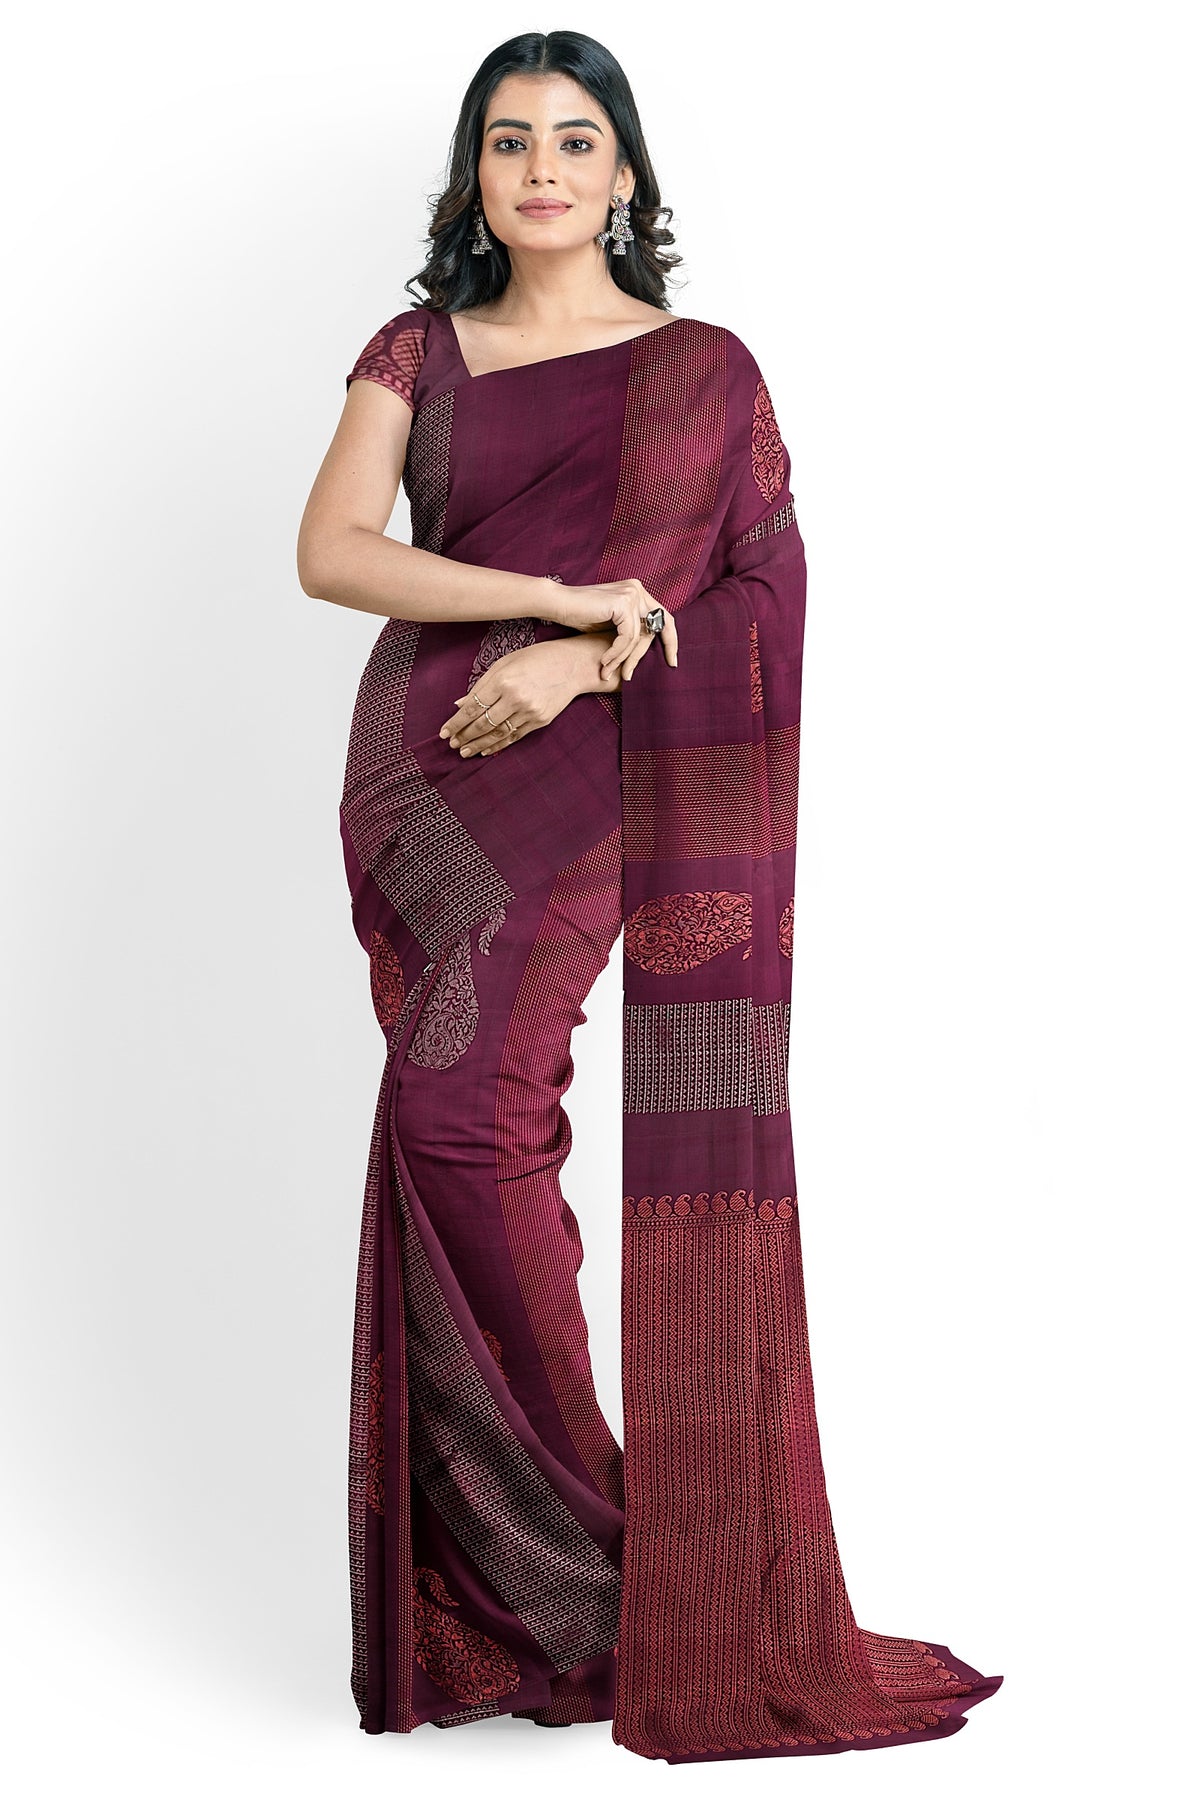 A model draped in a rich and lustrous maroon colored soft silk handloom saree with maroon body & pallu. The saree is designed with paisley & geometrical motifs in silver & copper zari works. The saree comes with an attached running blouse.